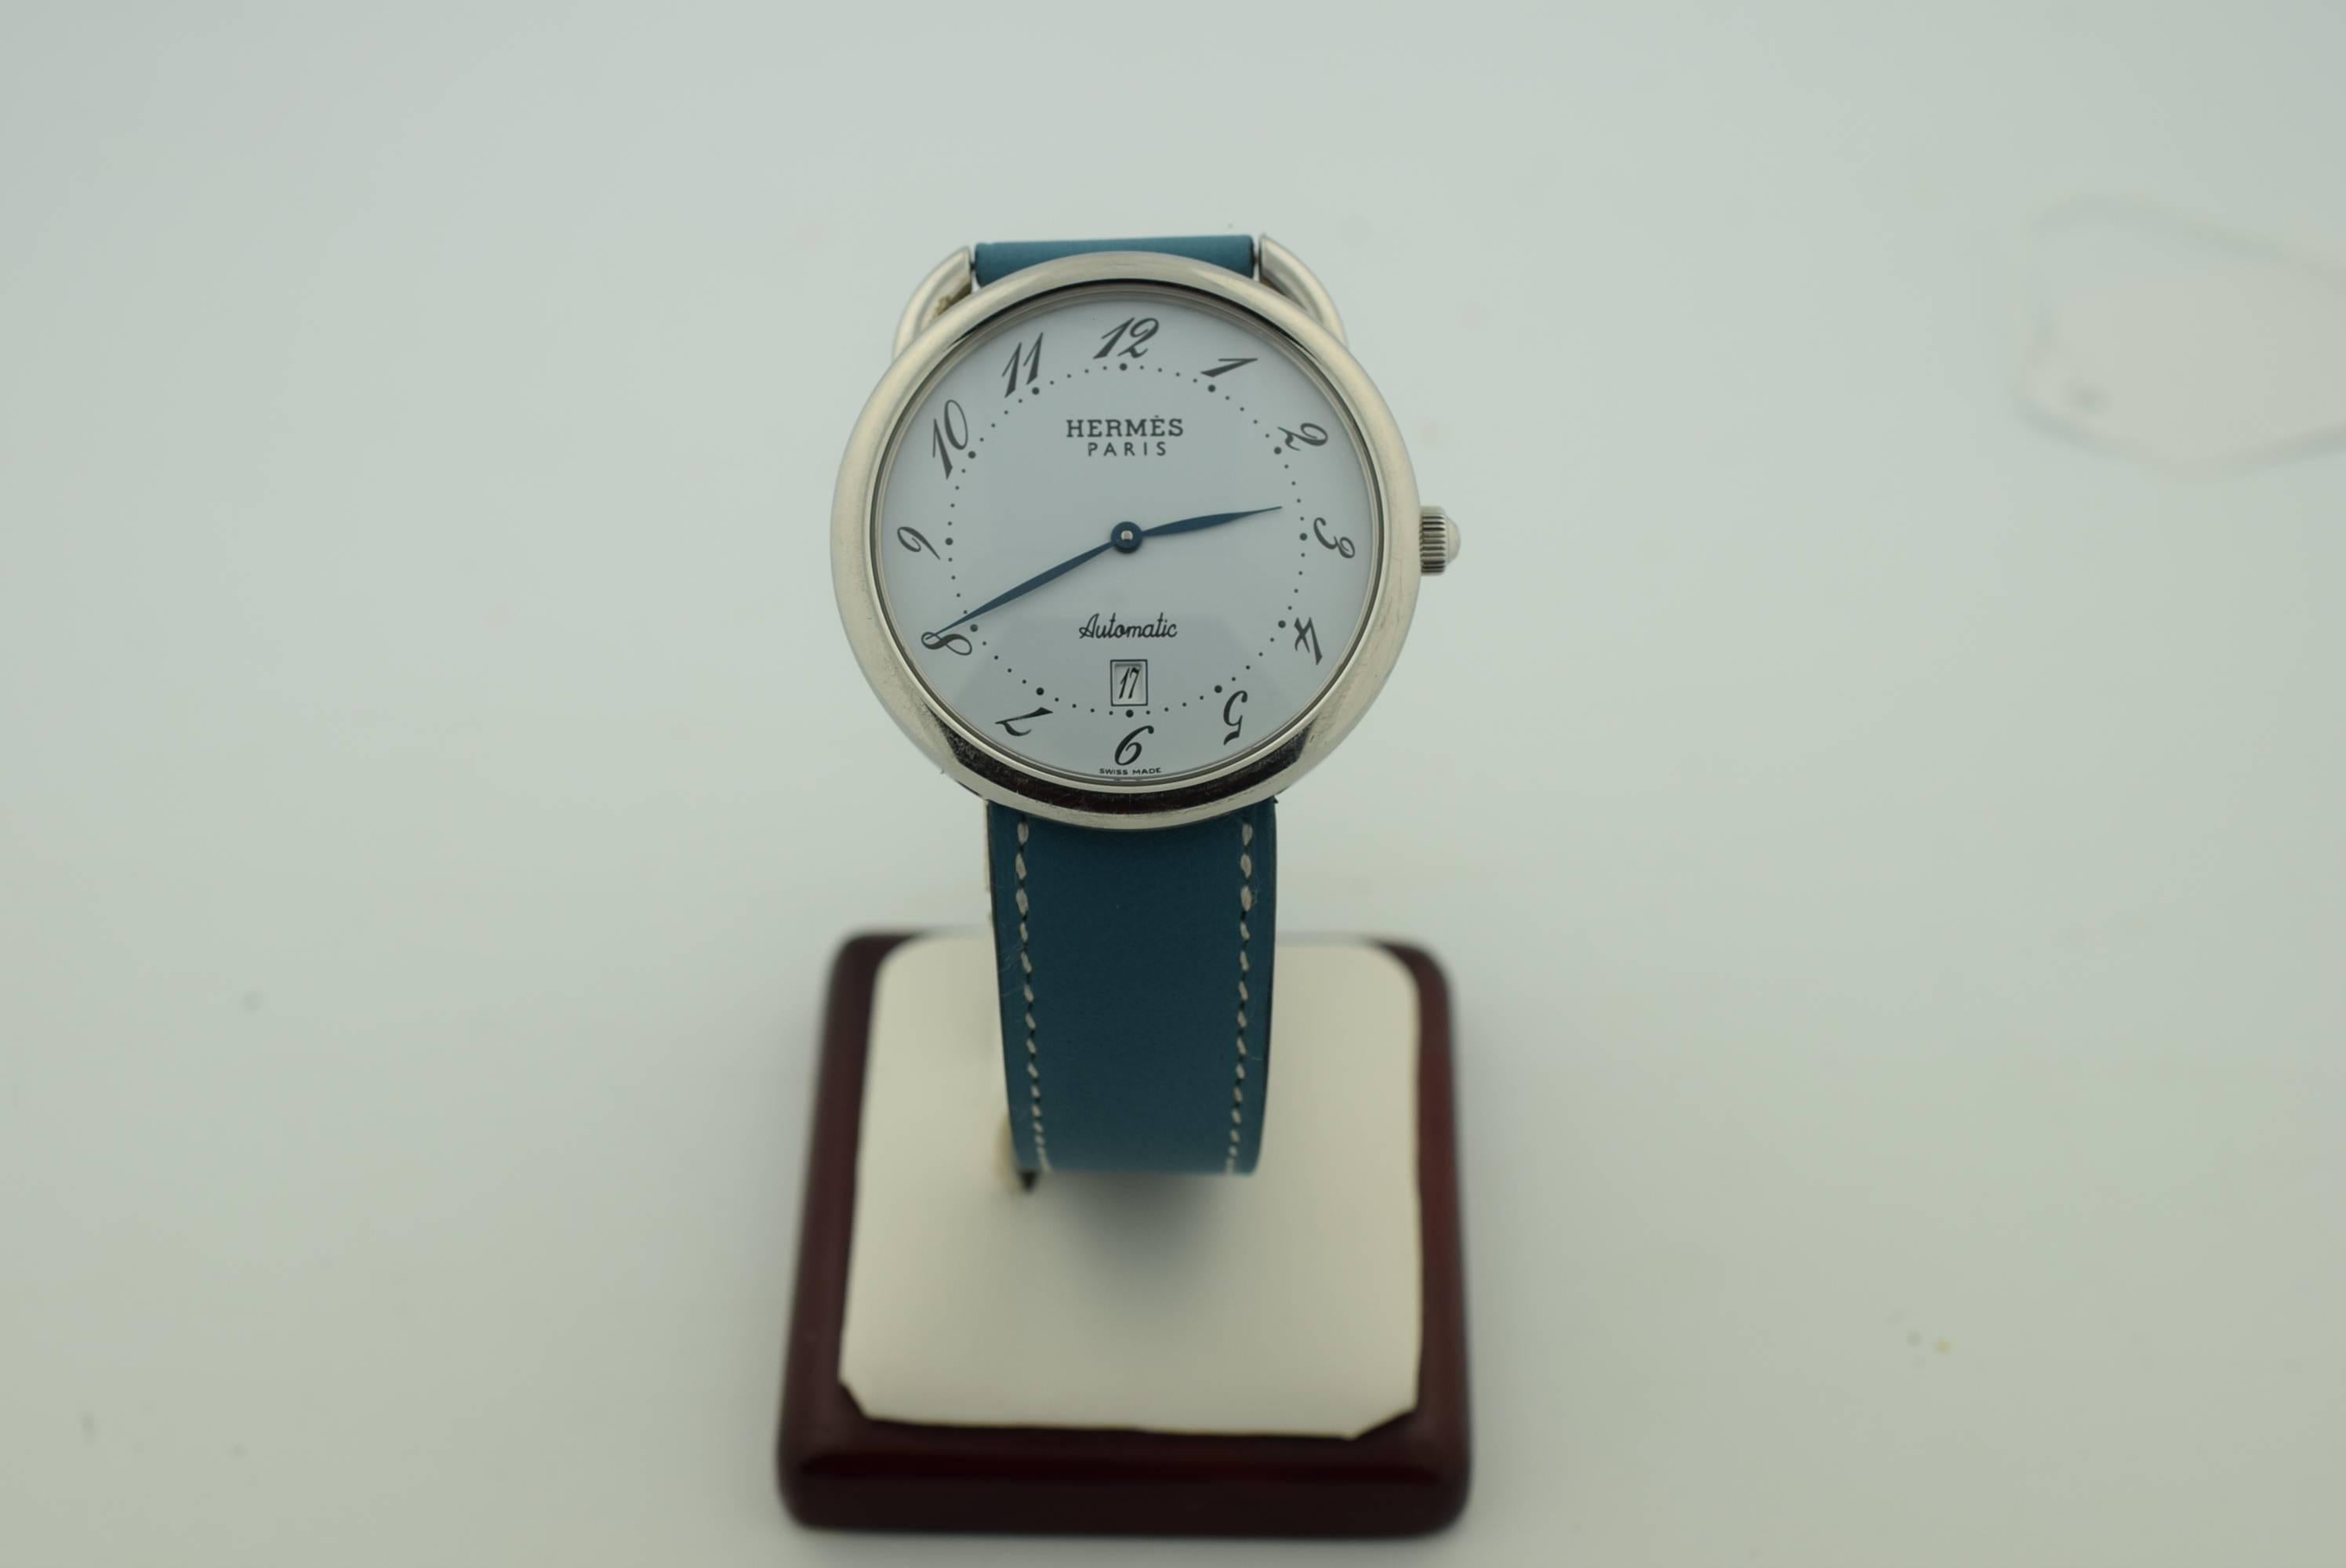 Hermes Arceau Watch with stainless steel case 38mm, White dial, mechanical self-winding movement, 42 hour power reserve, 3 atm water resistance, Blue calfskin deployment strap, made in Switzerland
Excellent condition with minor scratches - New